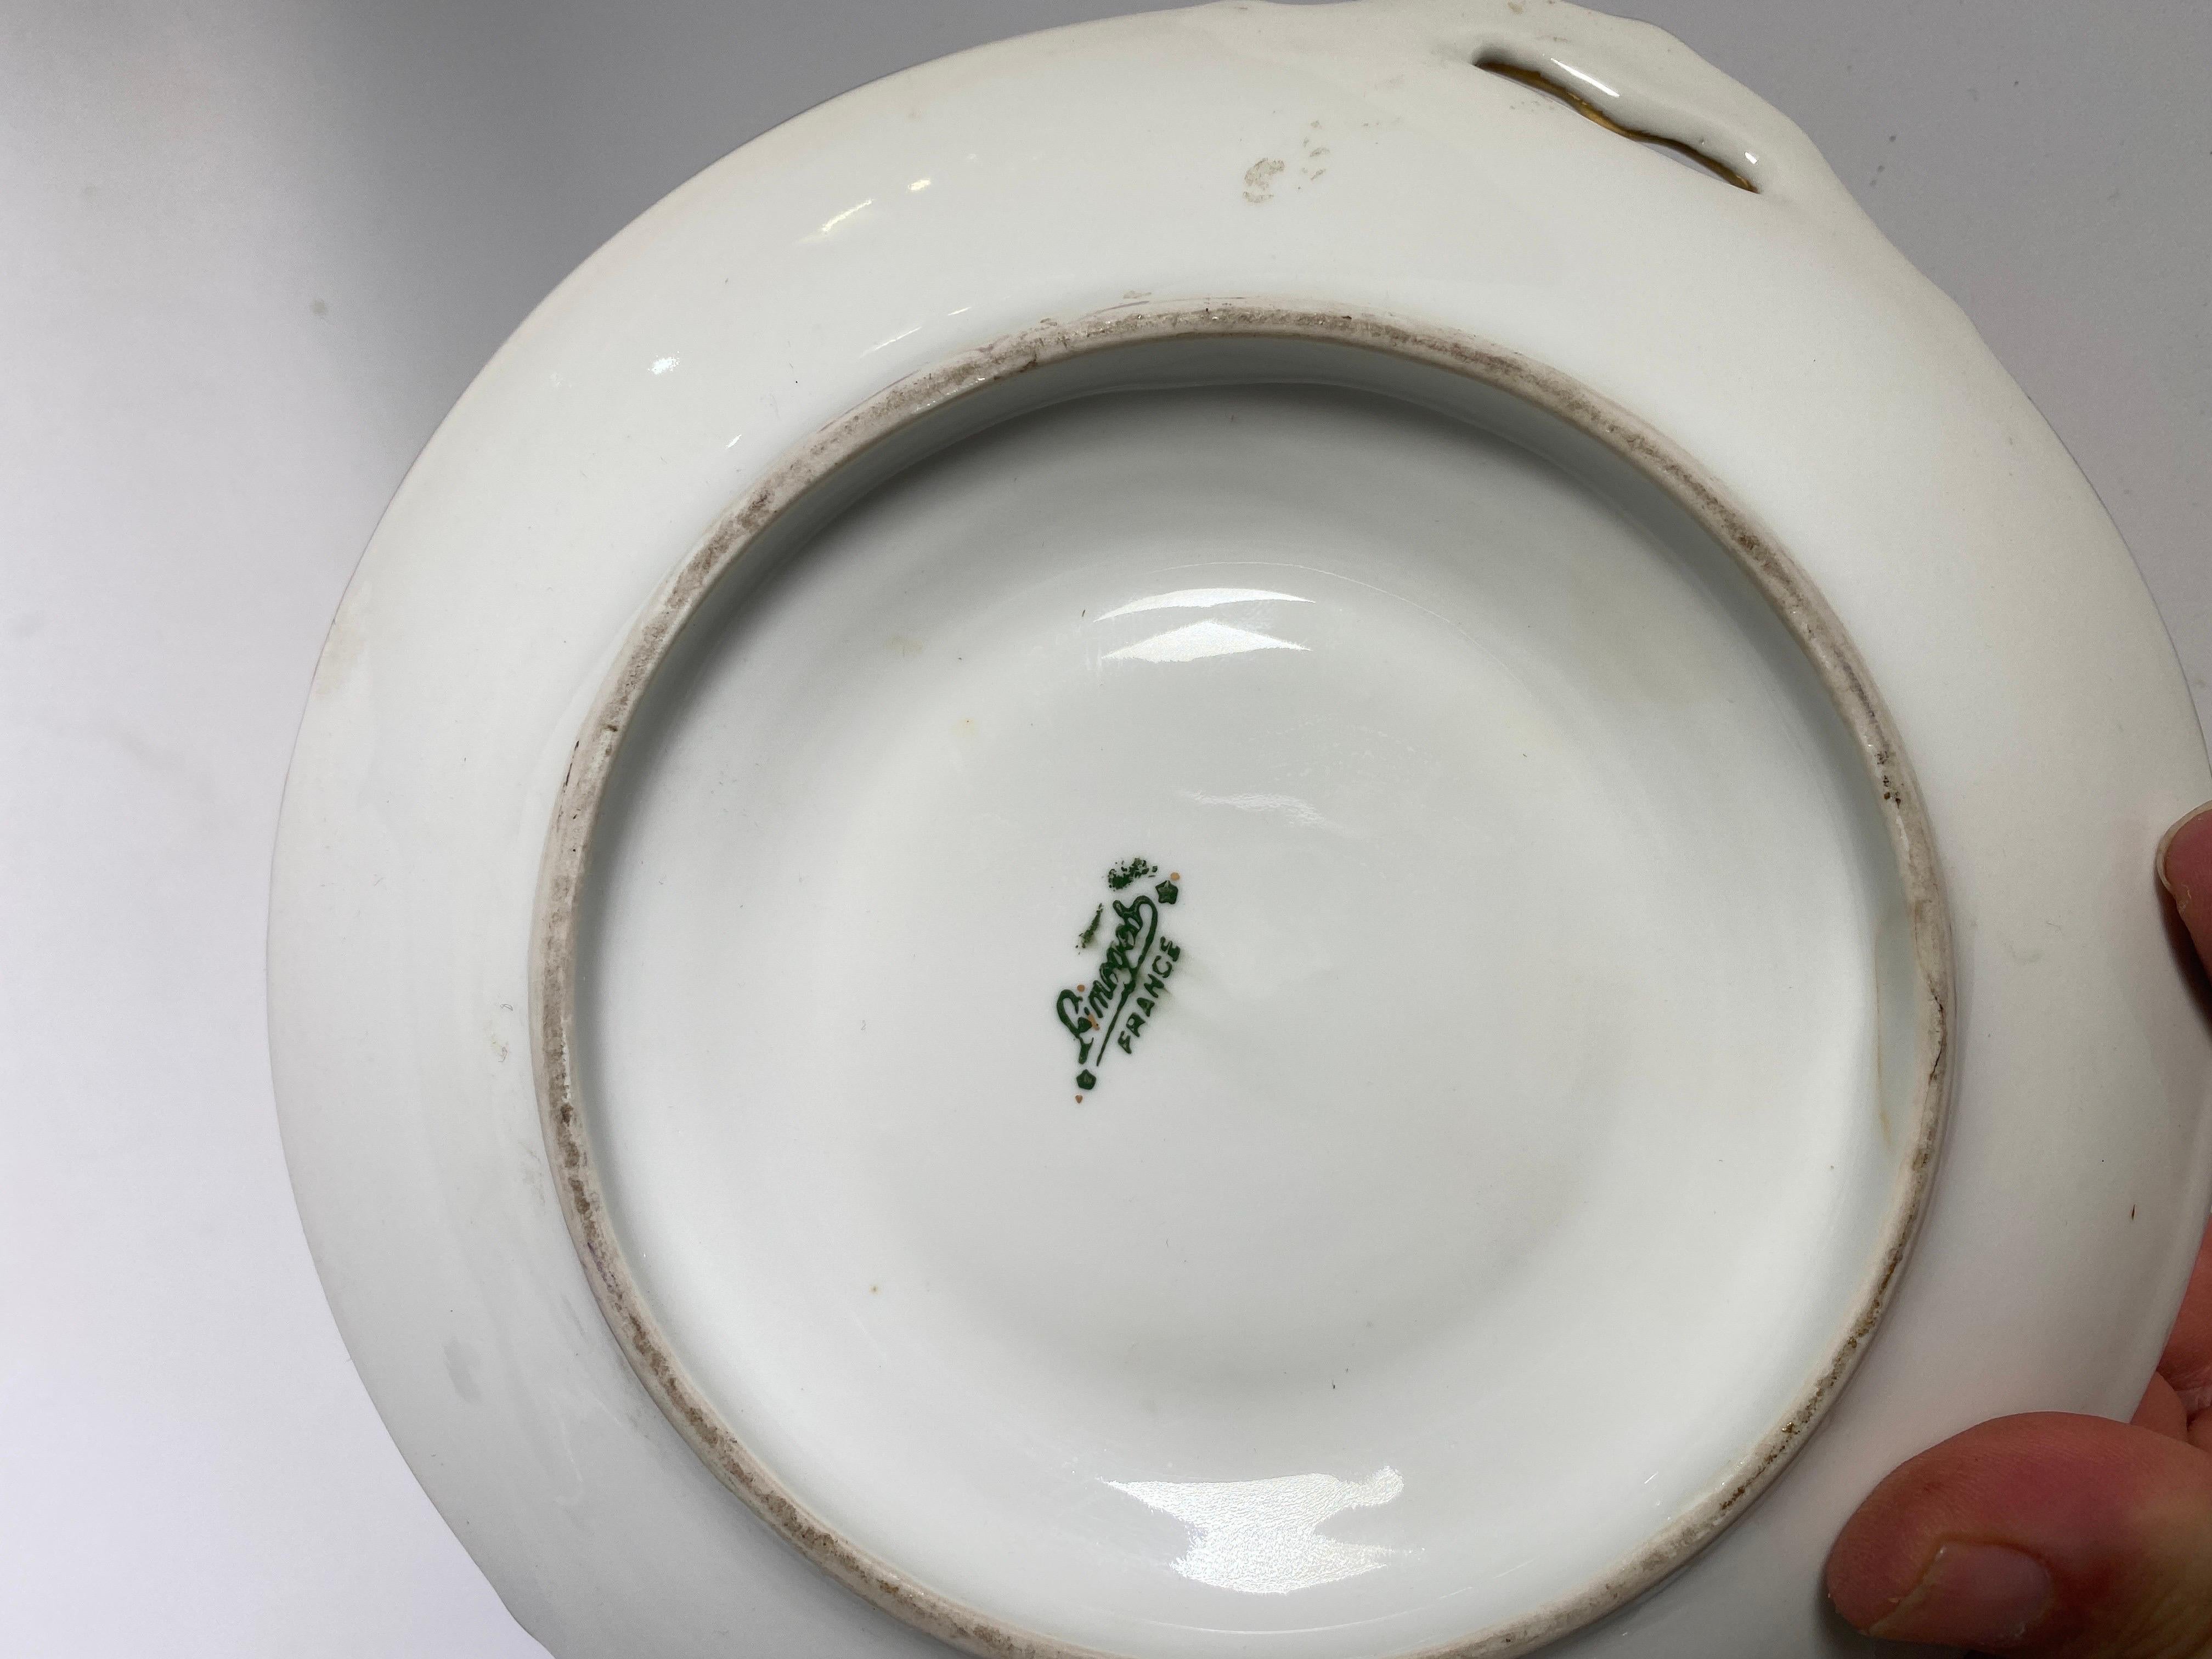 Limoges Urn or Bowl Porcelain, Green and Gold Color, Made in France, circa 1930 For Sale 1